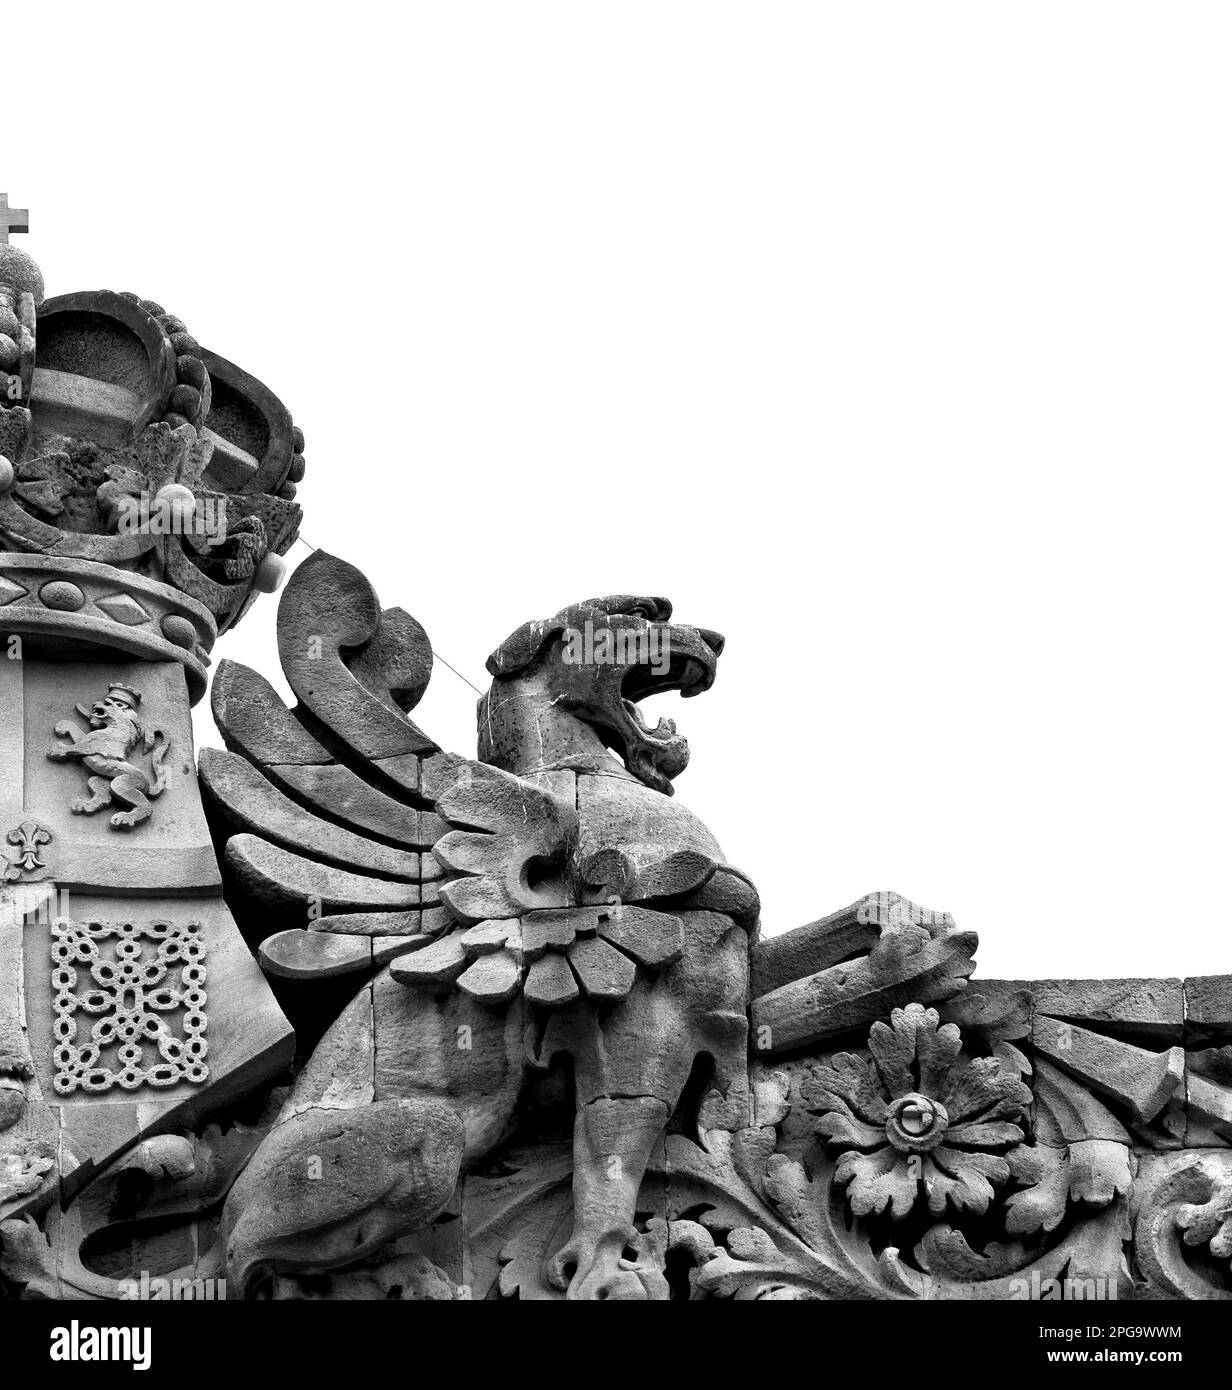 Shot color black and white detail on the facade of this historic building representing some character, animal or flower. Set at Prague, Czech Repúblic Stock Photo